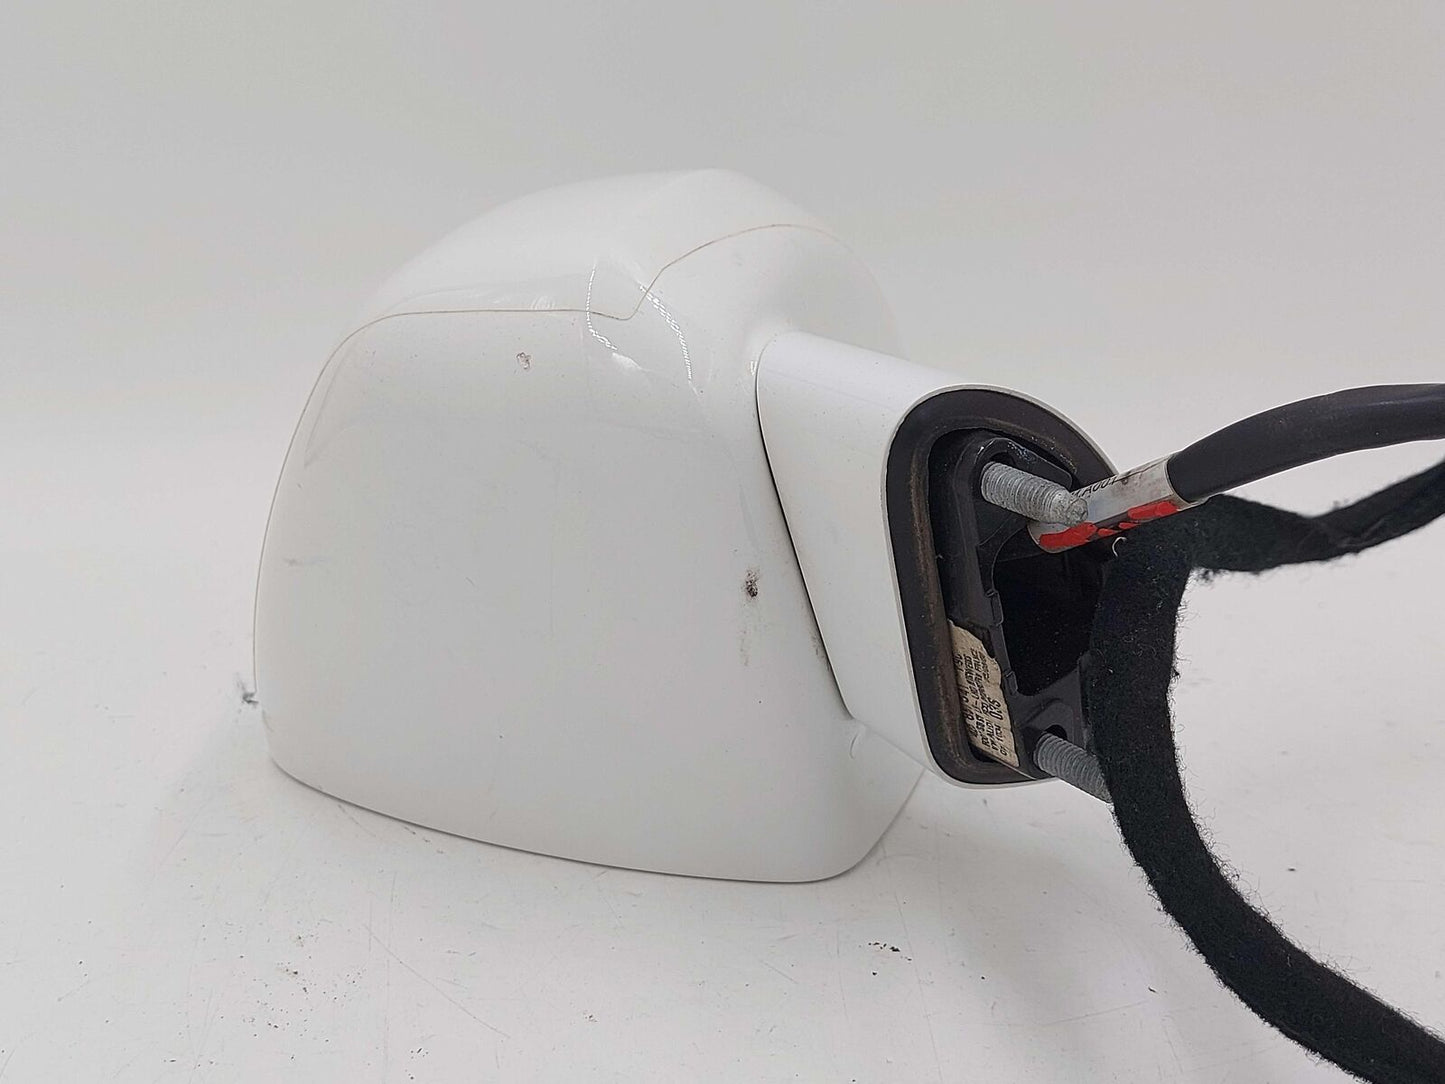 08-15 Audi R8 Left Door Mirror White Heated Power Folding *Scratched 3M Damage